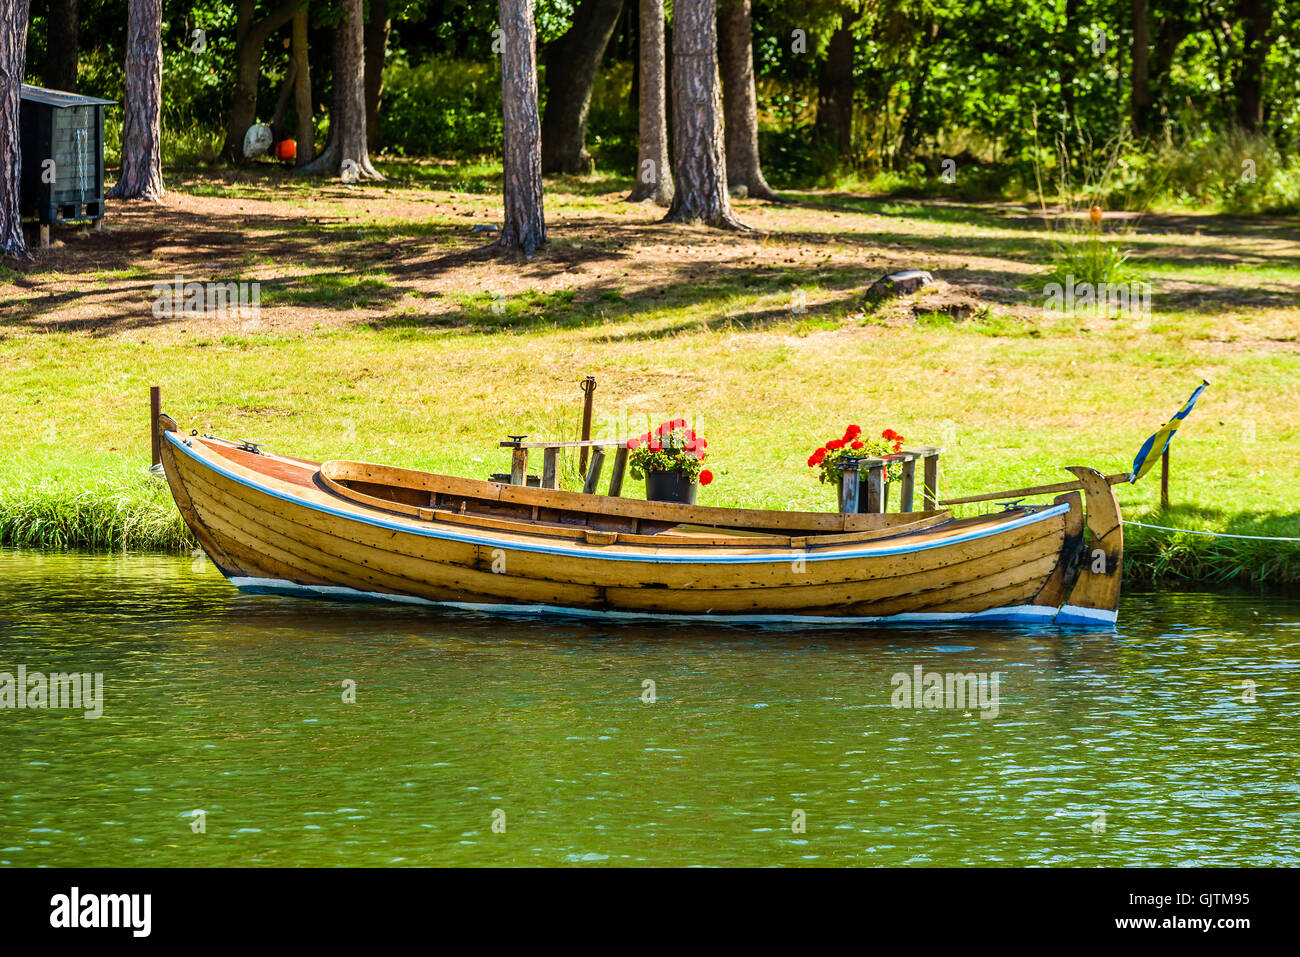 Old wooden motorboat moored by the shore with pine trees and grass in the background. Stock Photo